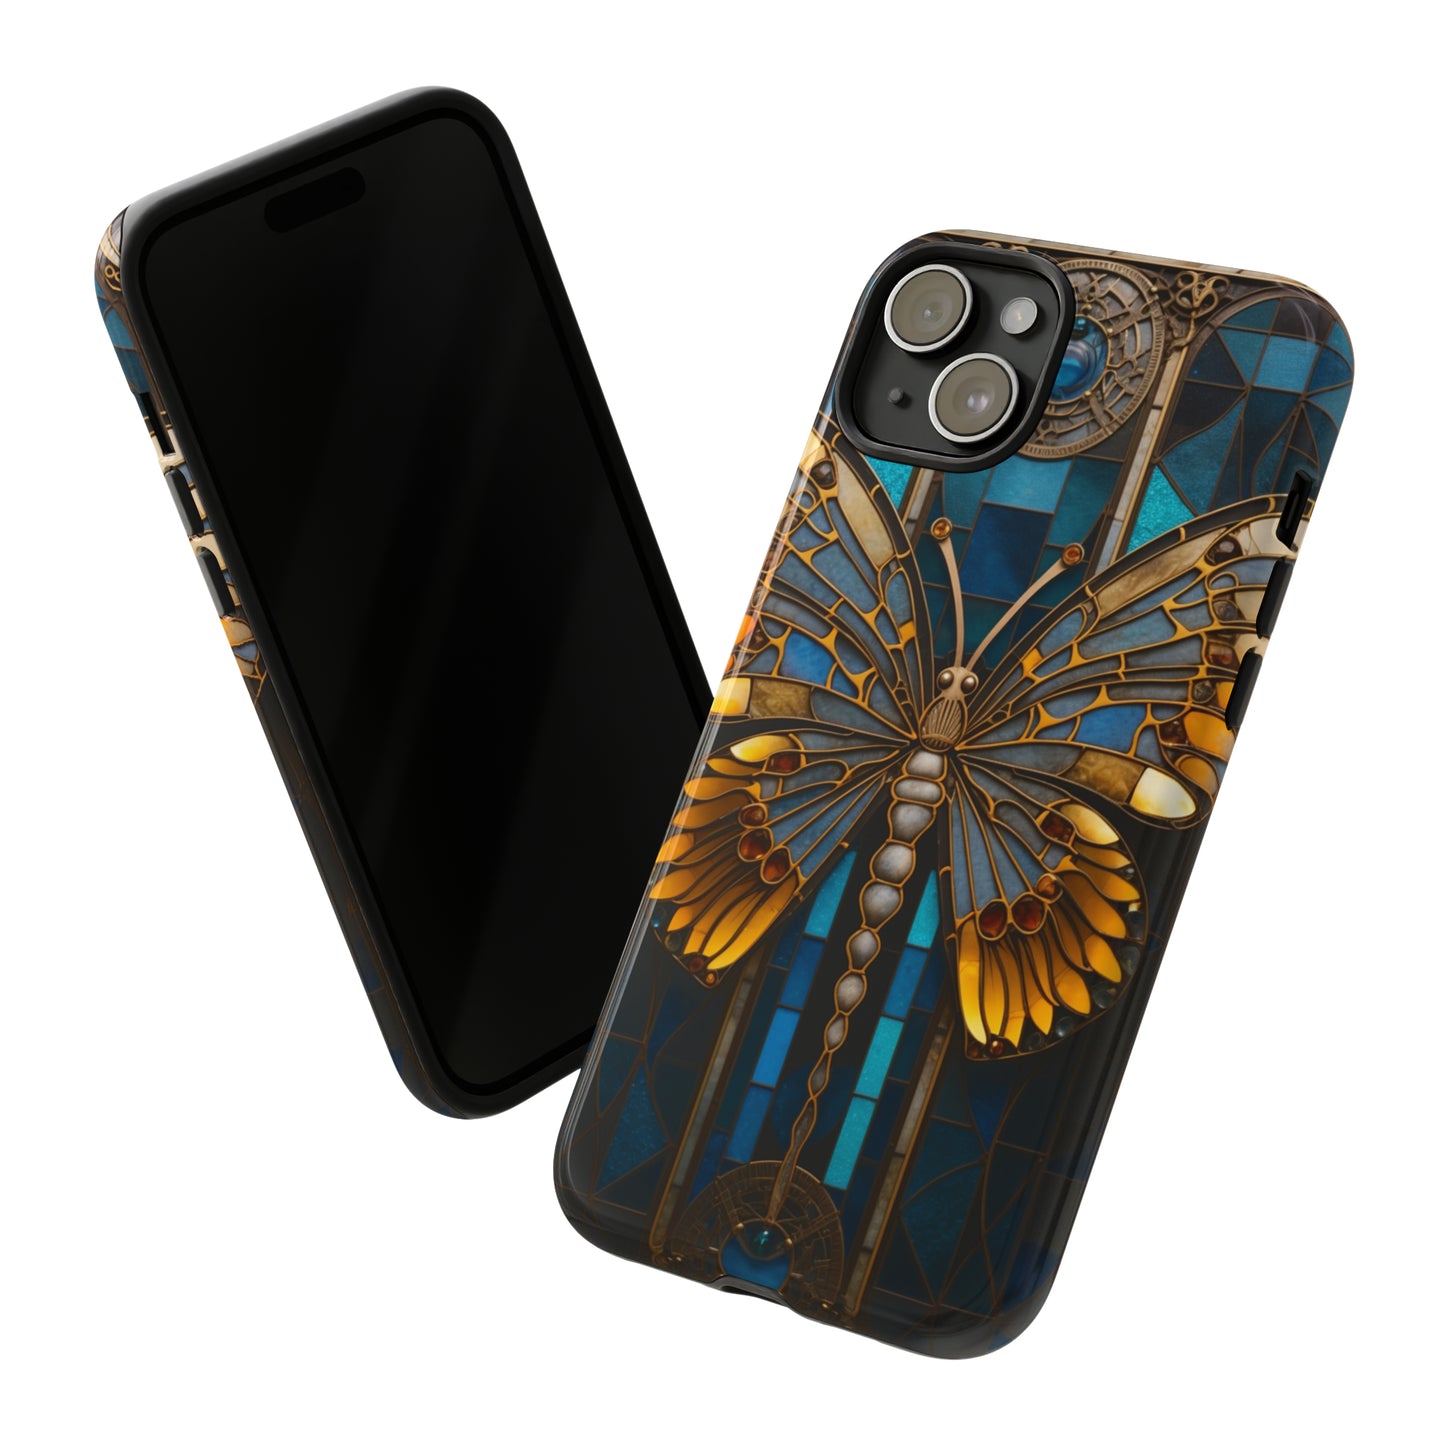 Stained Glass iPhone Butterfly Floral Aesthetic Art Nouveau